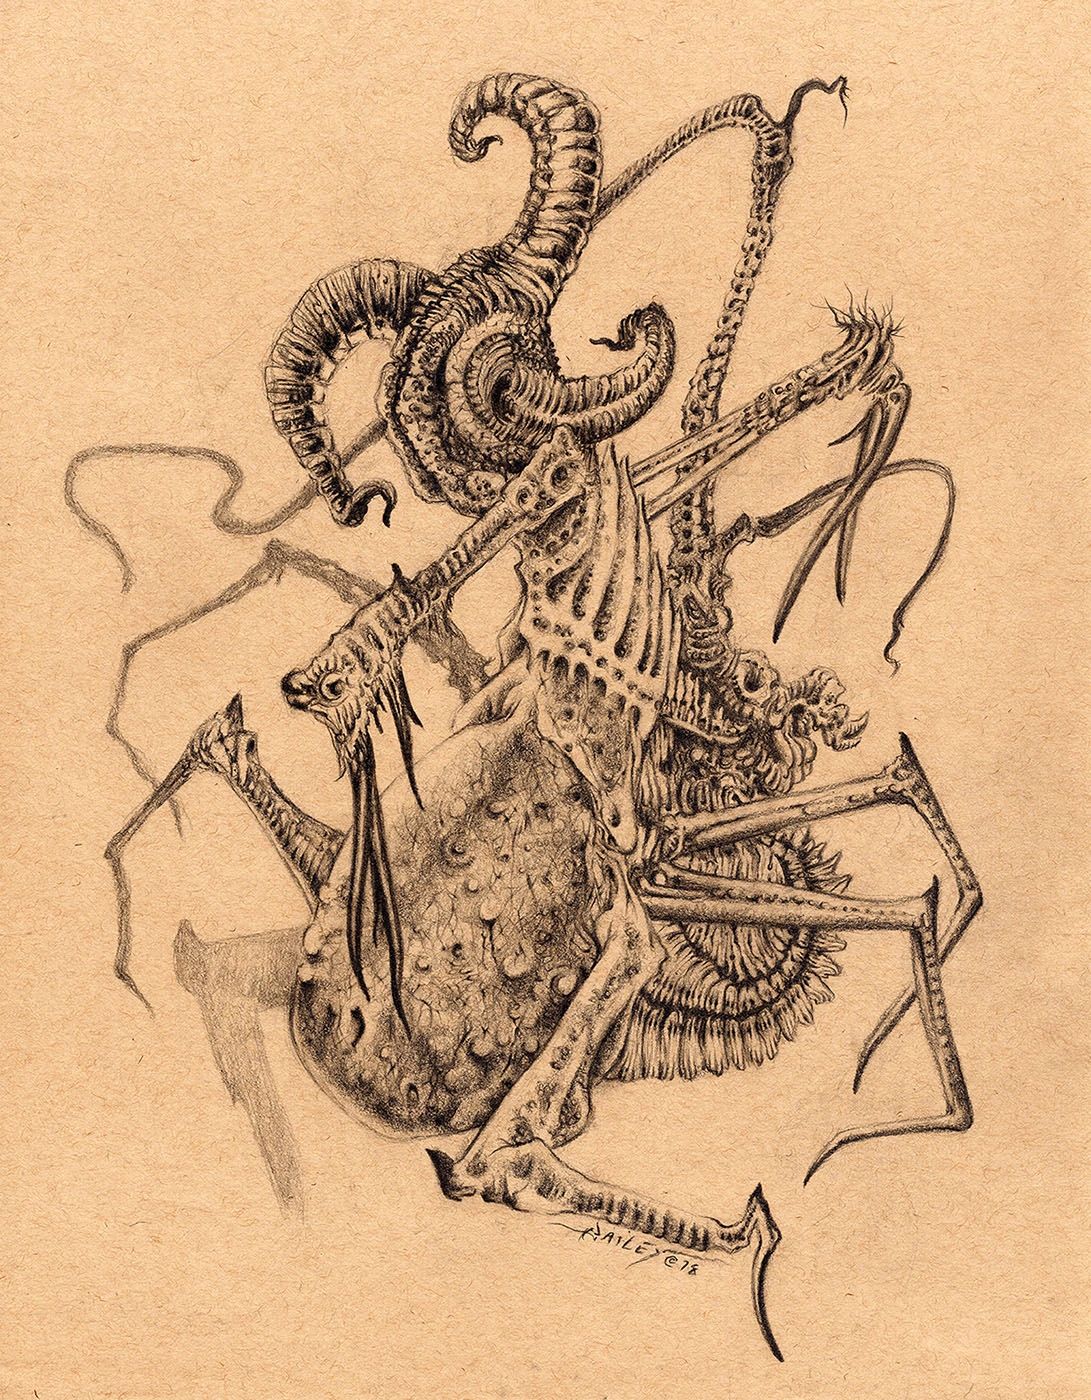 Three-horned, pot-bellied creature with flailing boney tentacles and no discernible facial features.